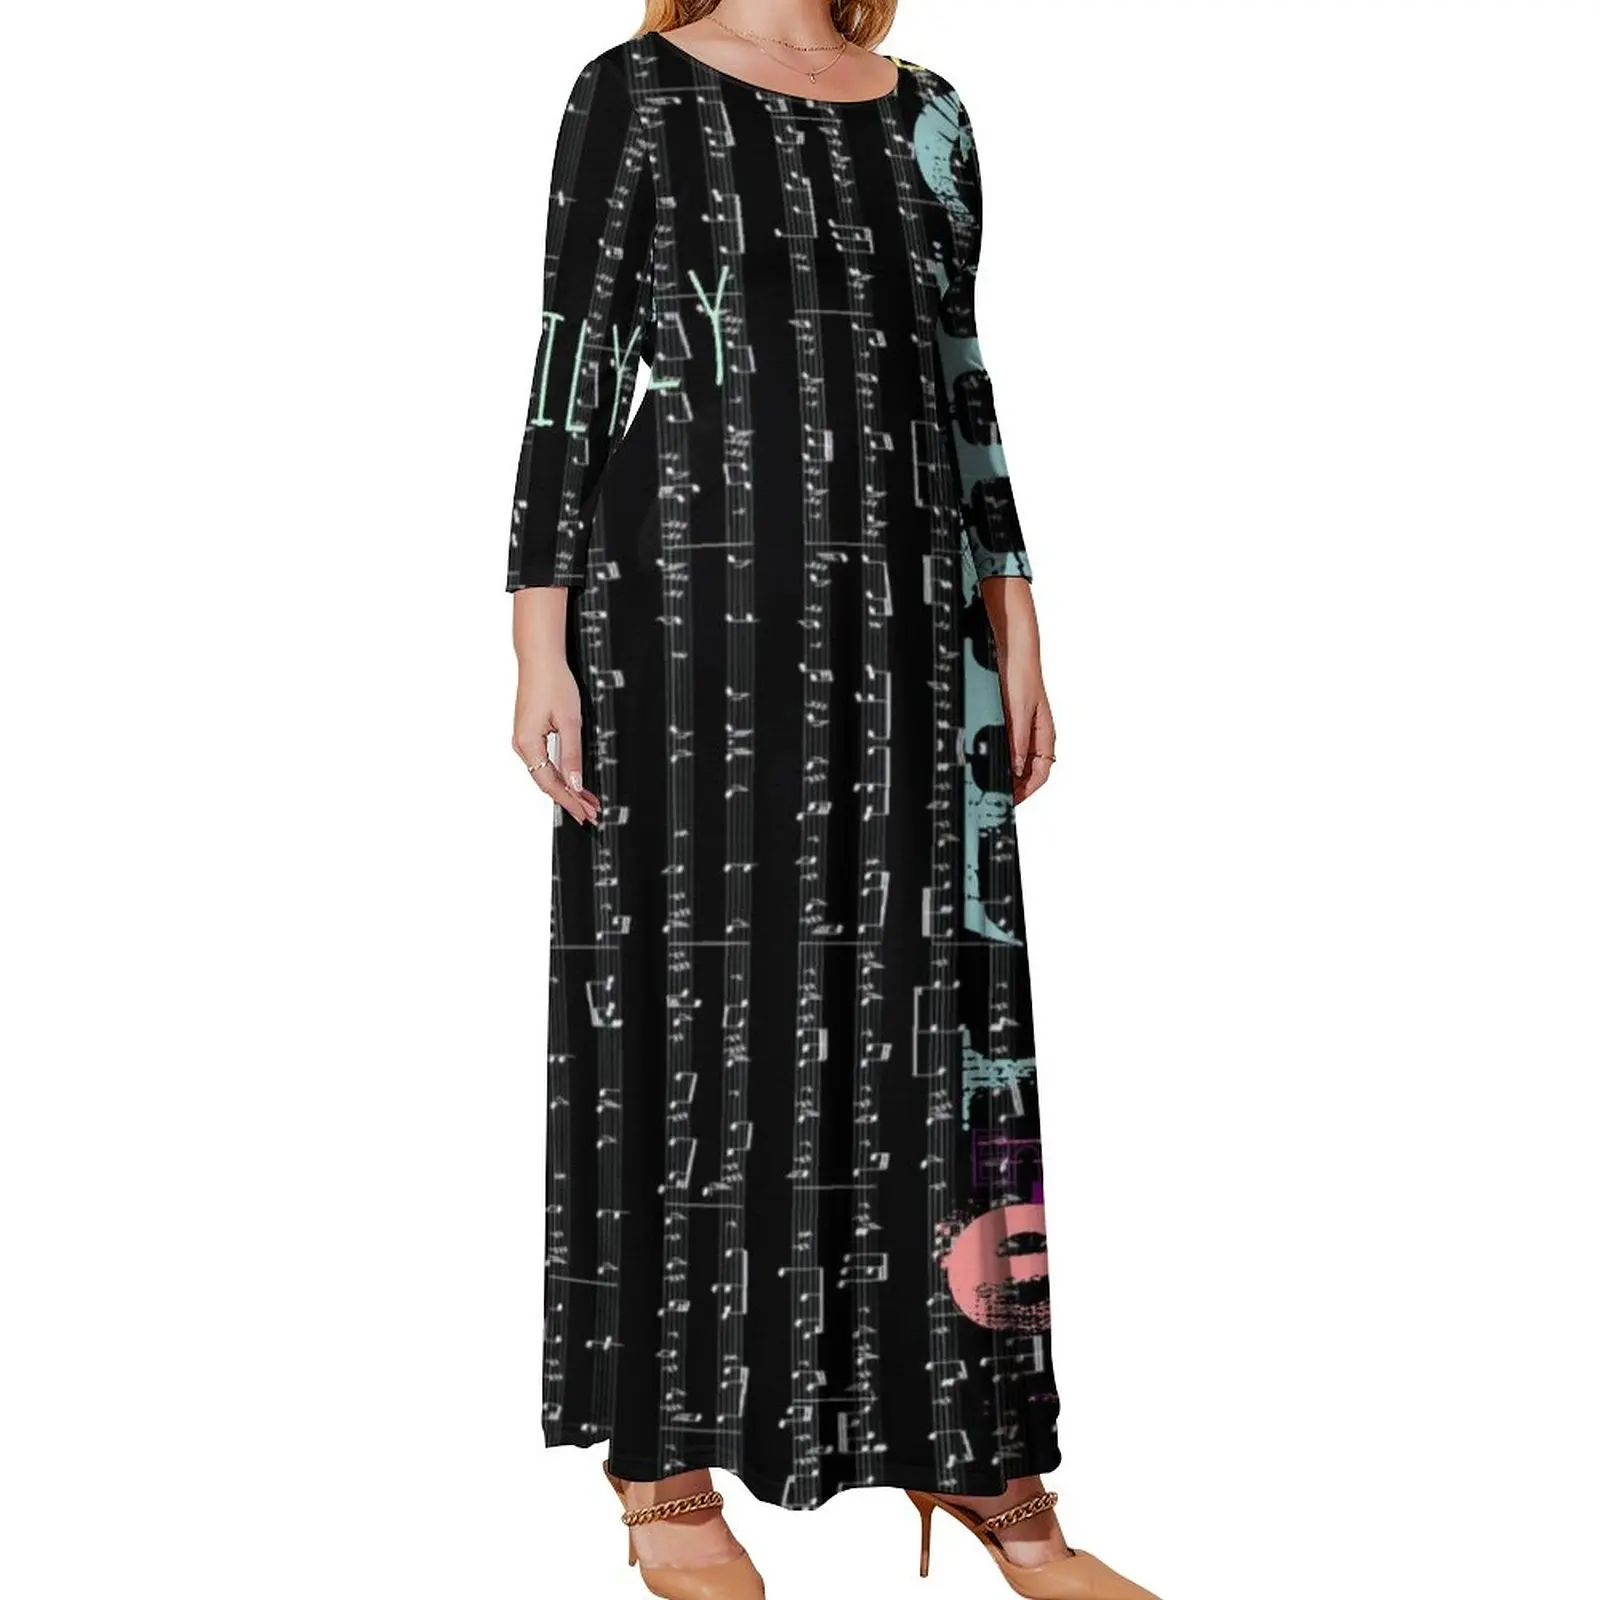 Colorful Letter Print Dress Plus Size Music Notes Sexy Printed Maxi Dress Long Sleeve Streetwear Bohemia Long Dresses Gift